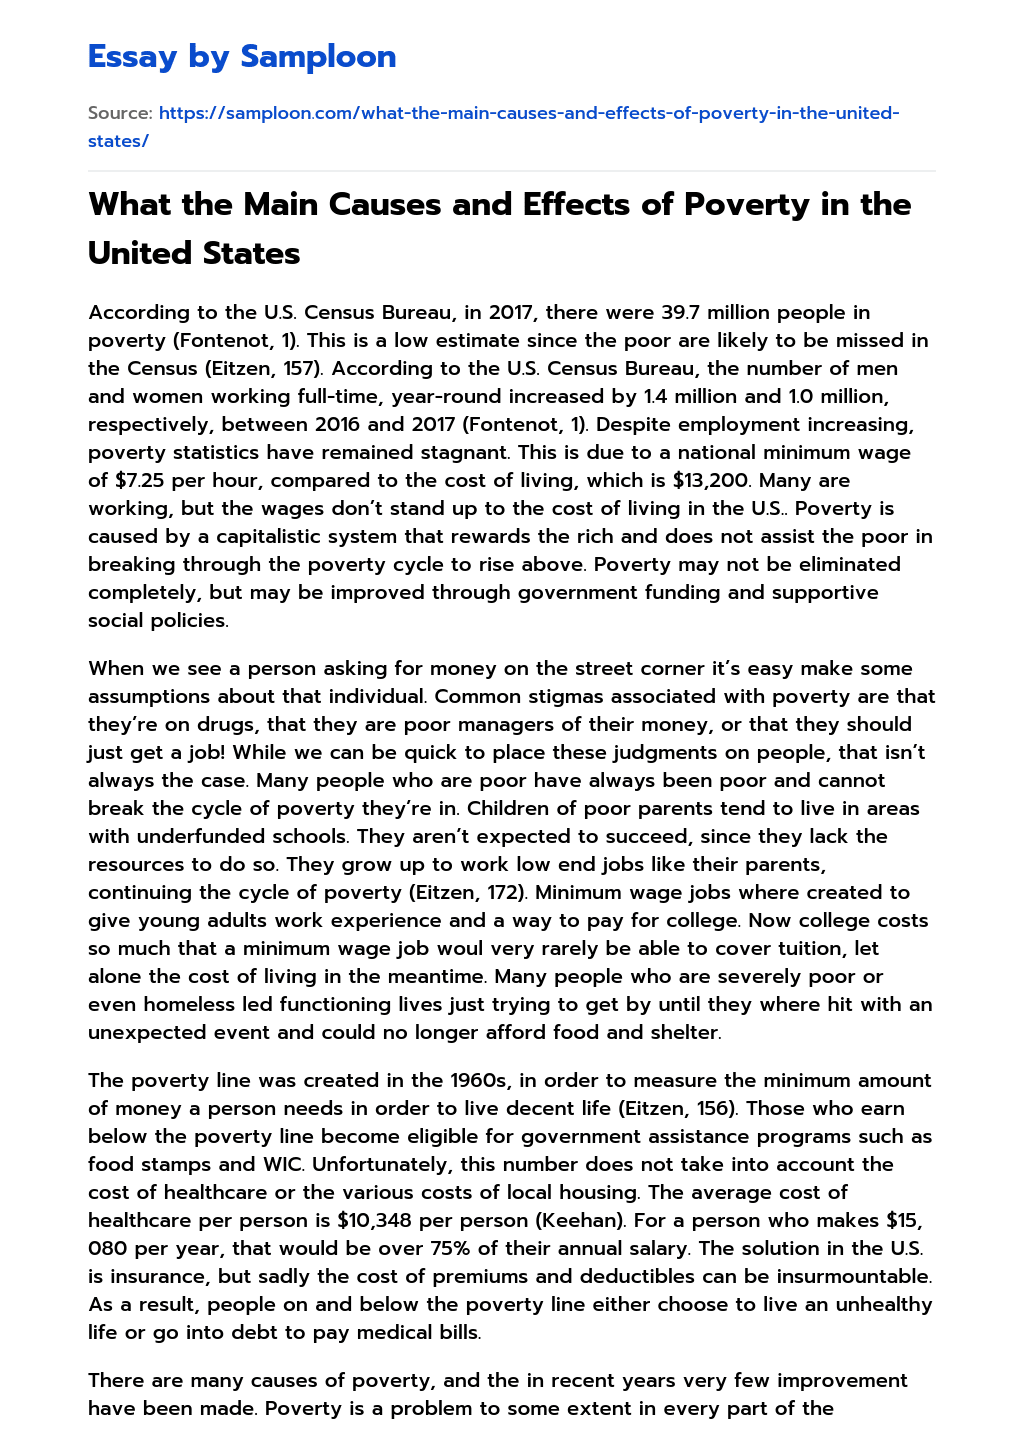 What the Main Causes and Effects of Poverty in the United States essay